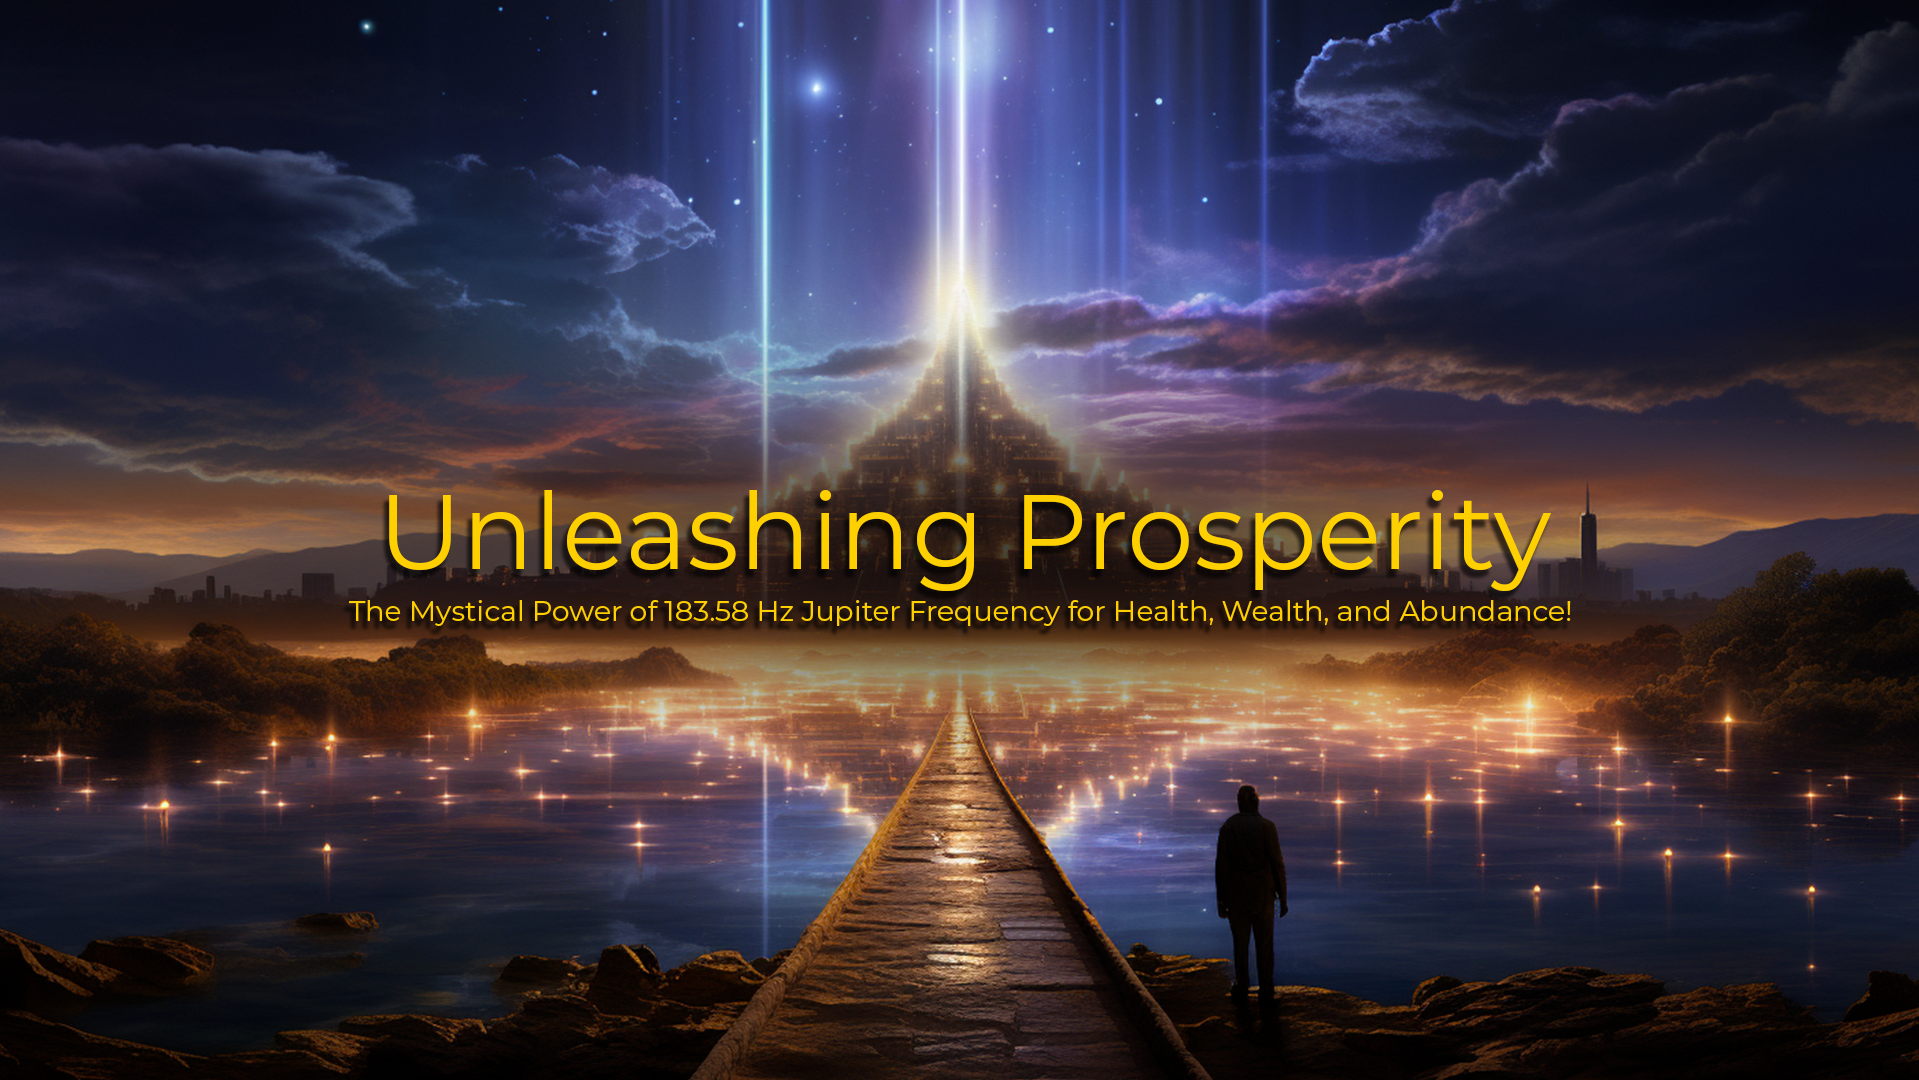 Unleashing Prosperity: The Mystical Power of 183.58 Hz Jupiter Frequency for Health, Wealth, and Abundance!